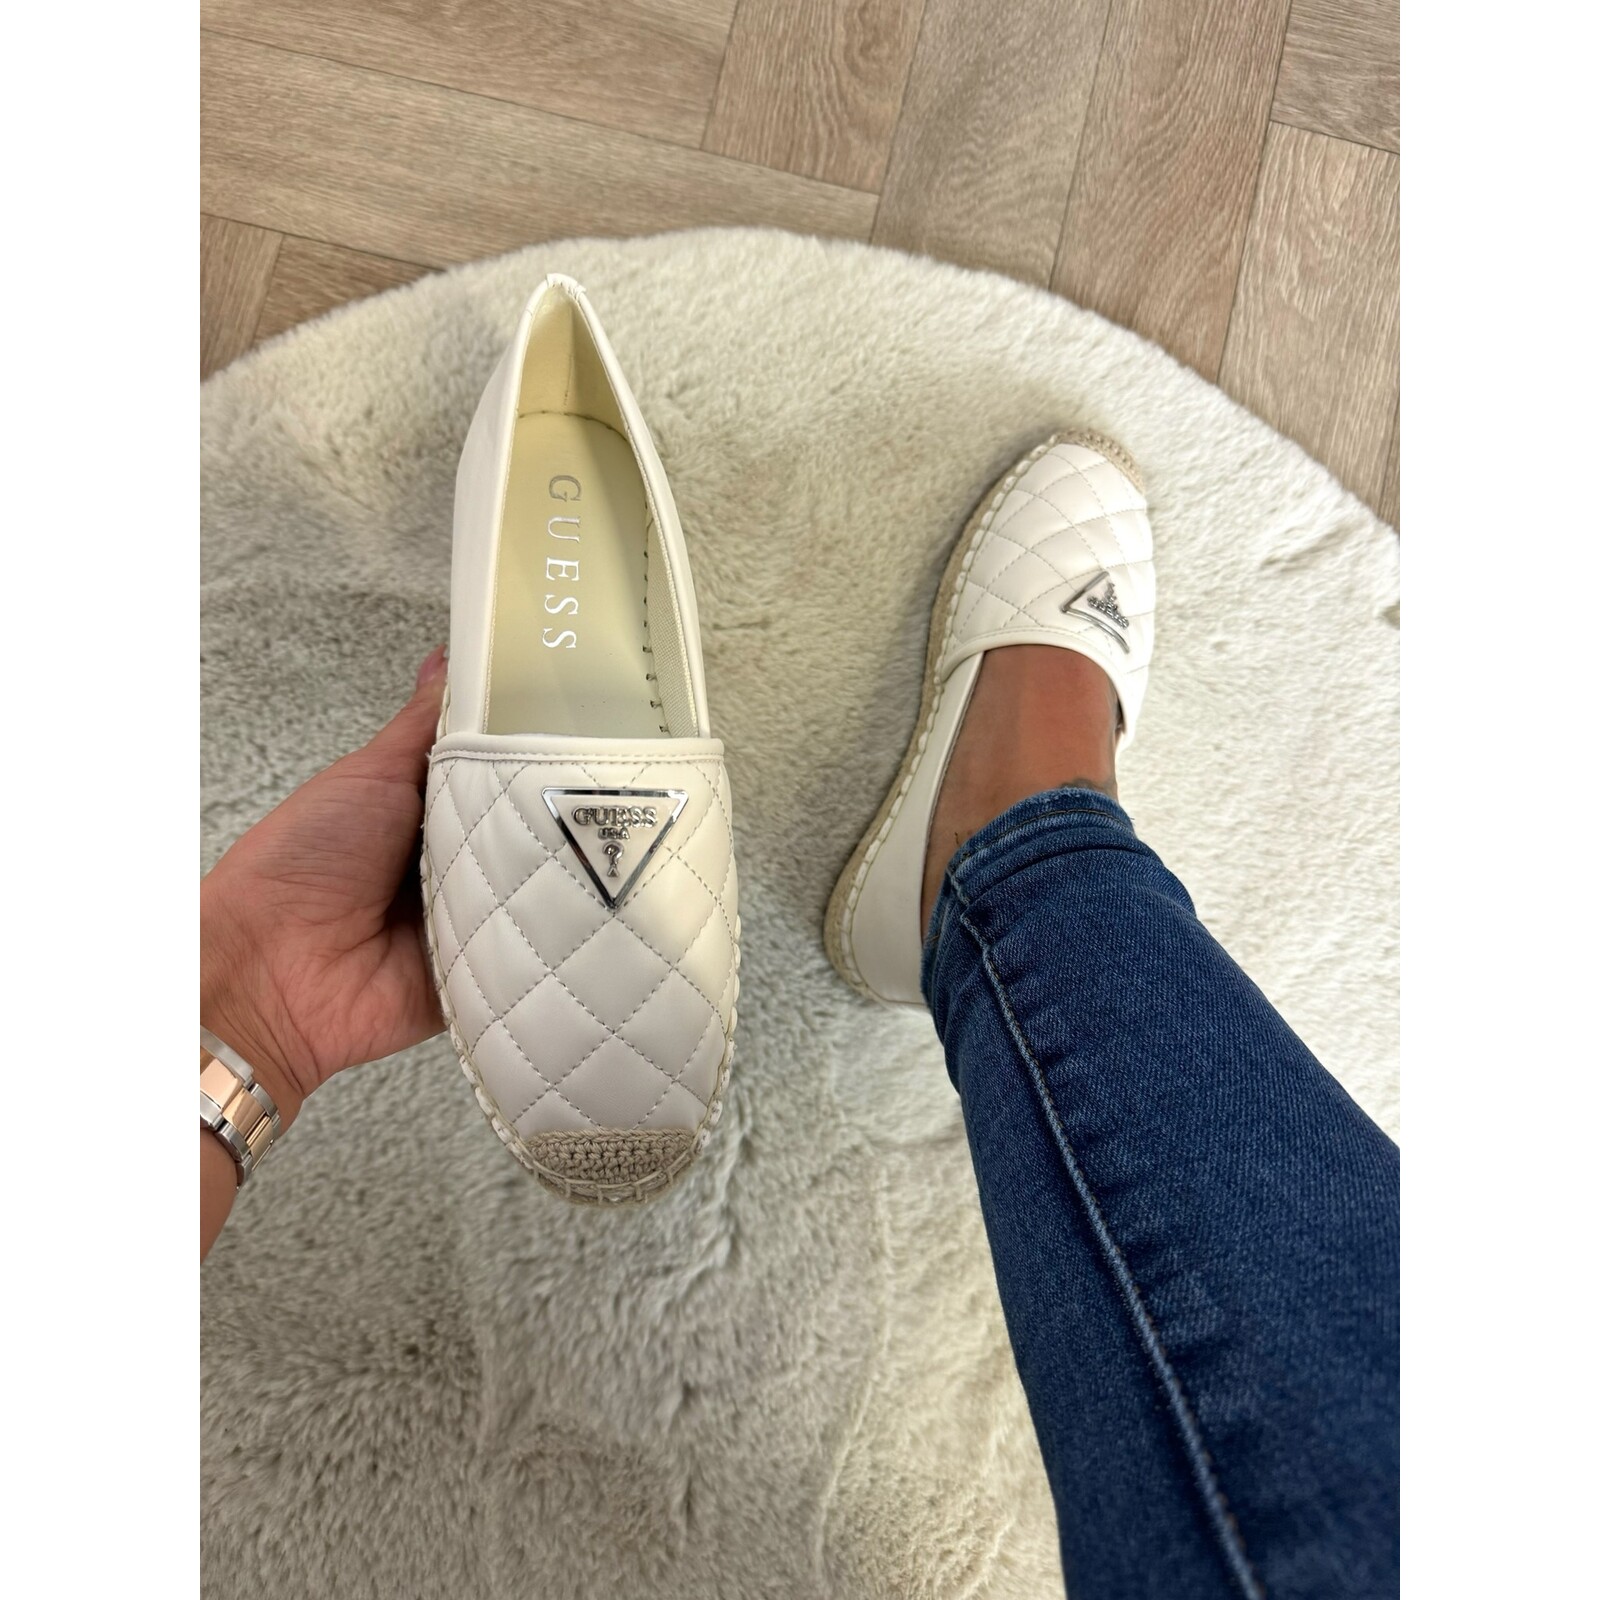 Guess Espadrilles Triangle Logo Off White Guess 828